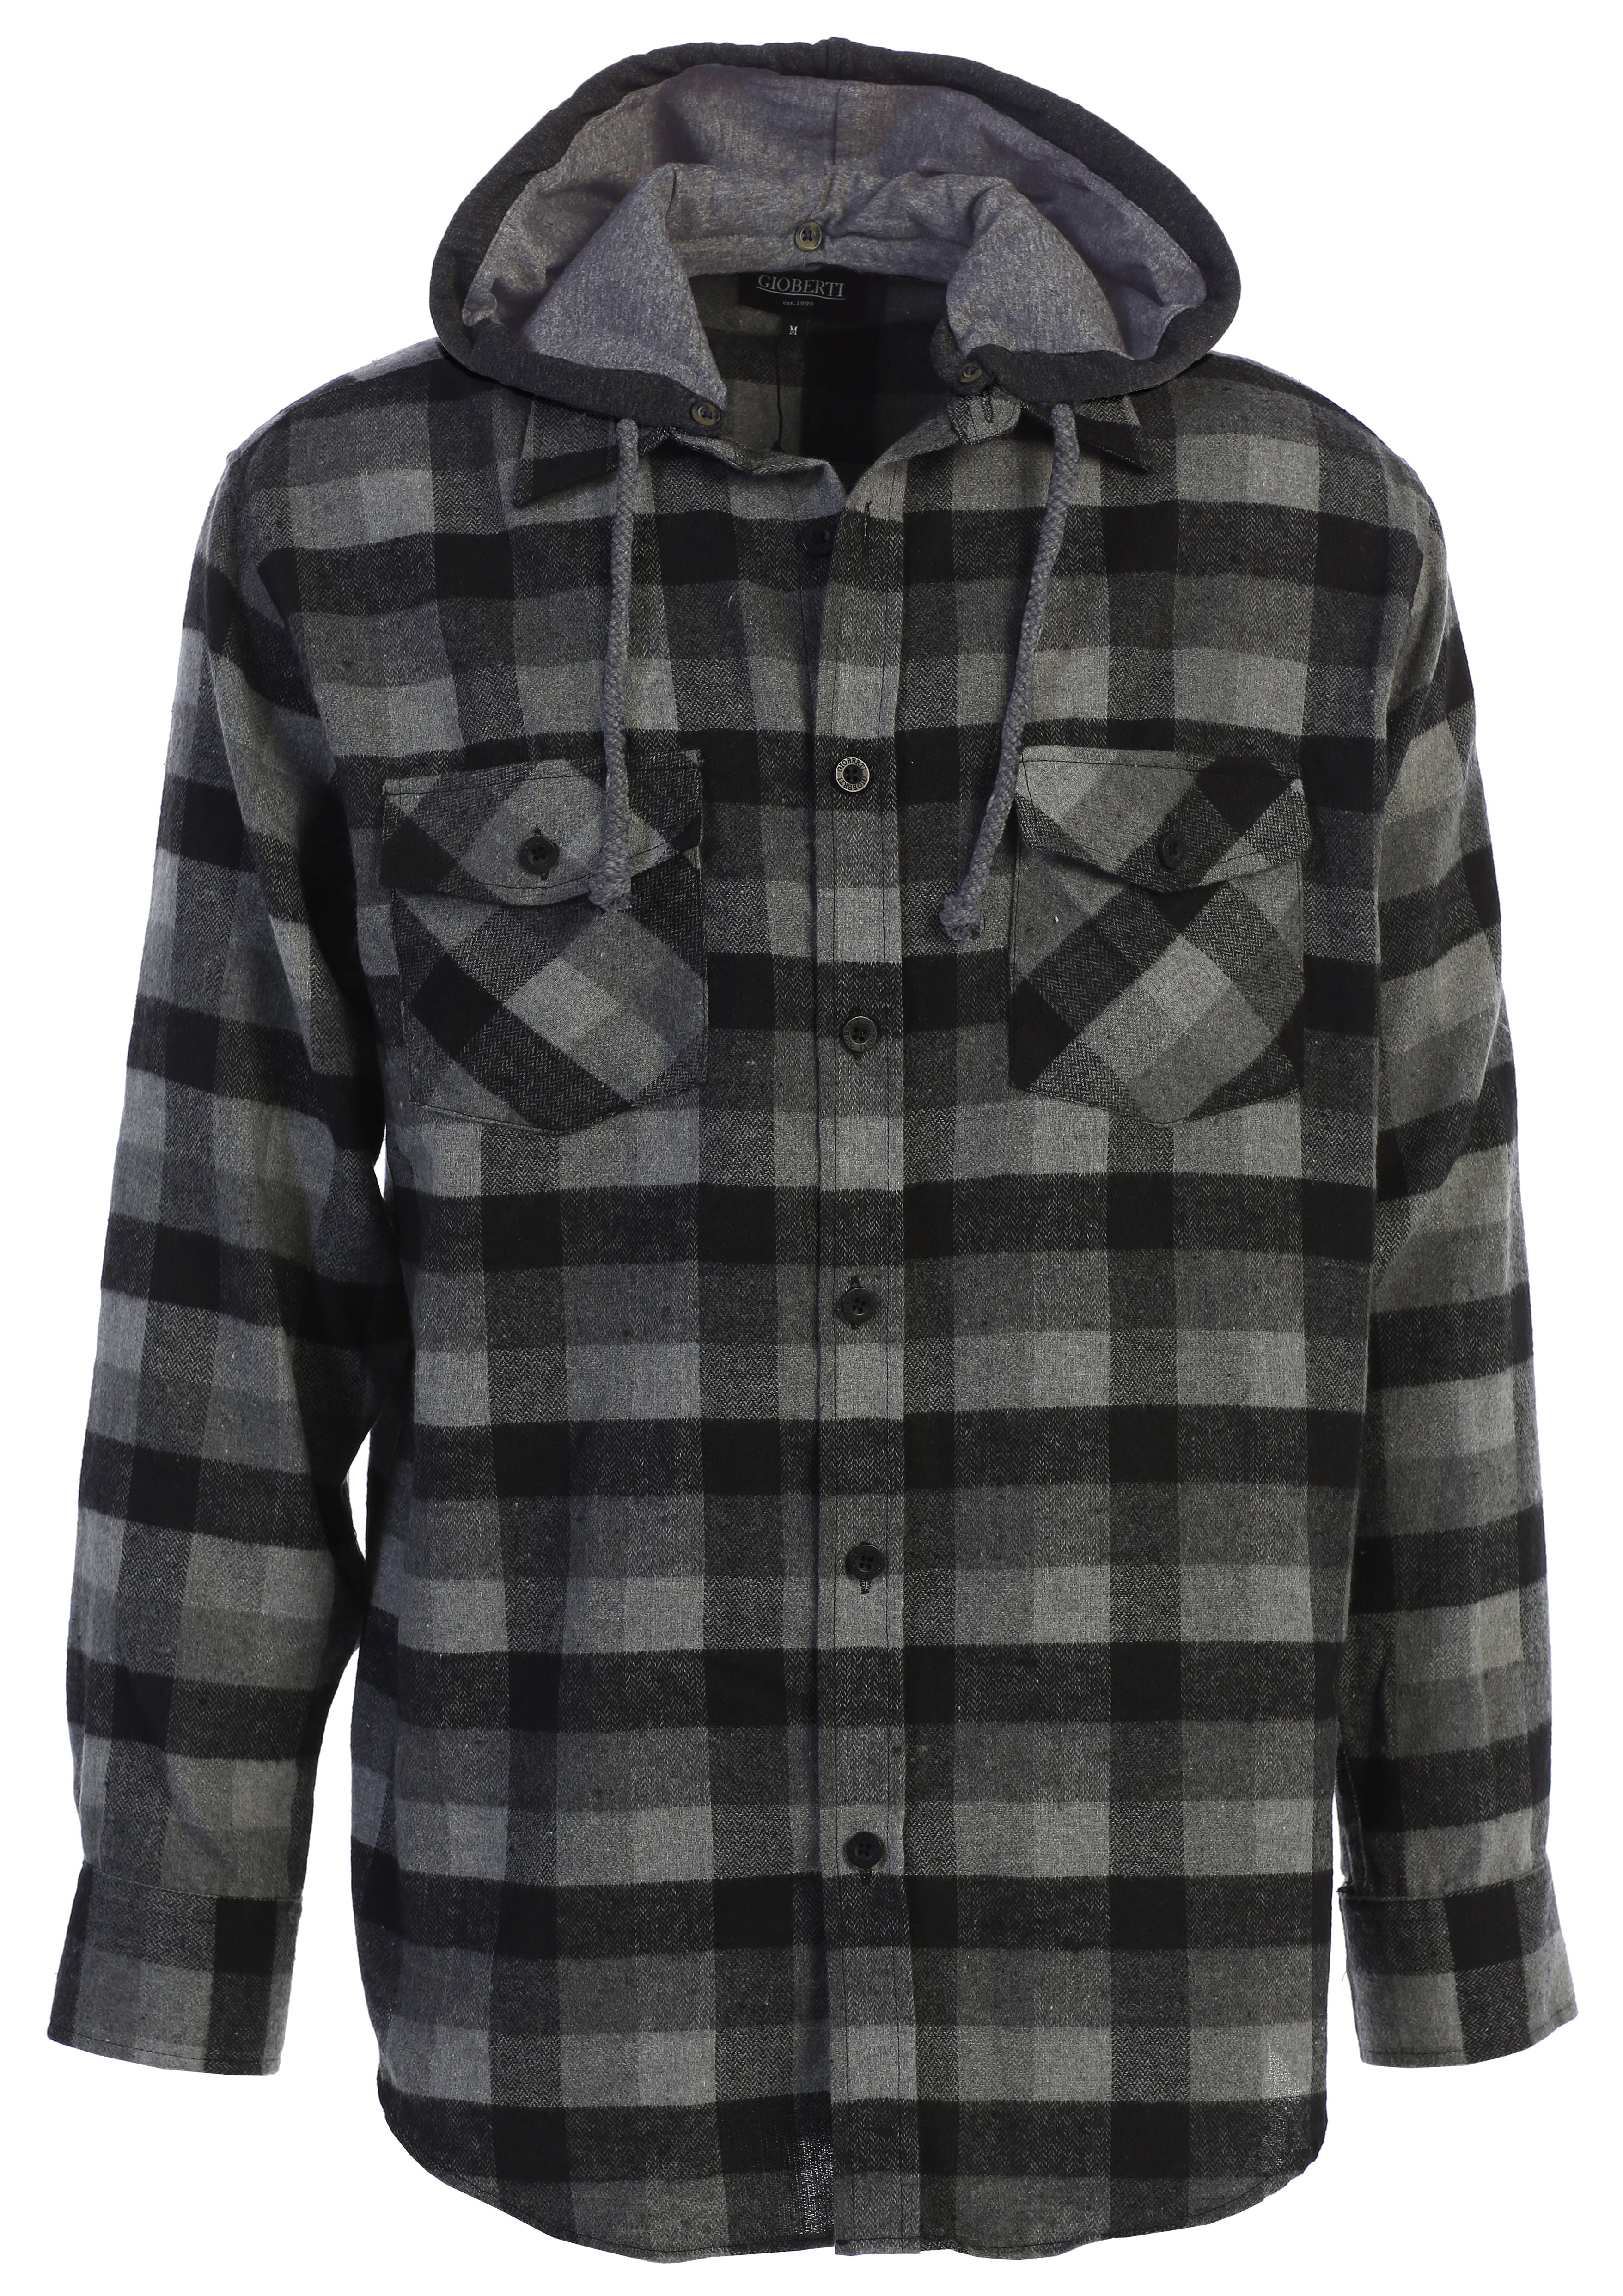 Gioberti Men's Brushed and Soft Twill Shirt Jacket with Flannel